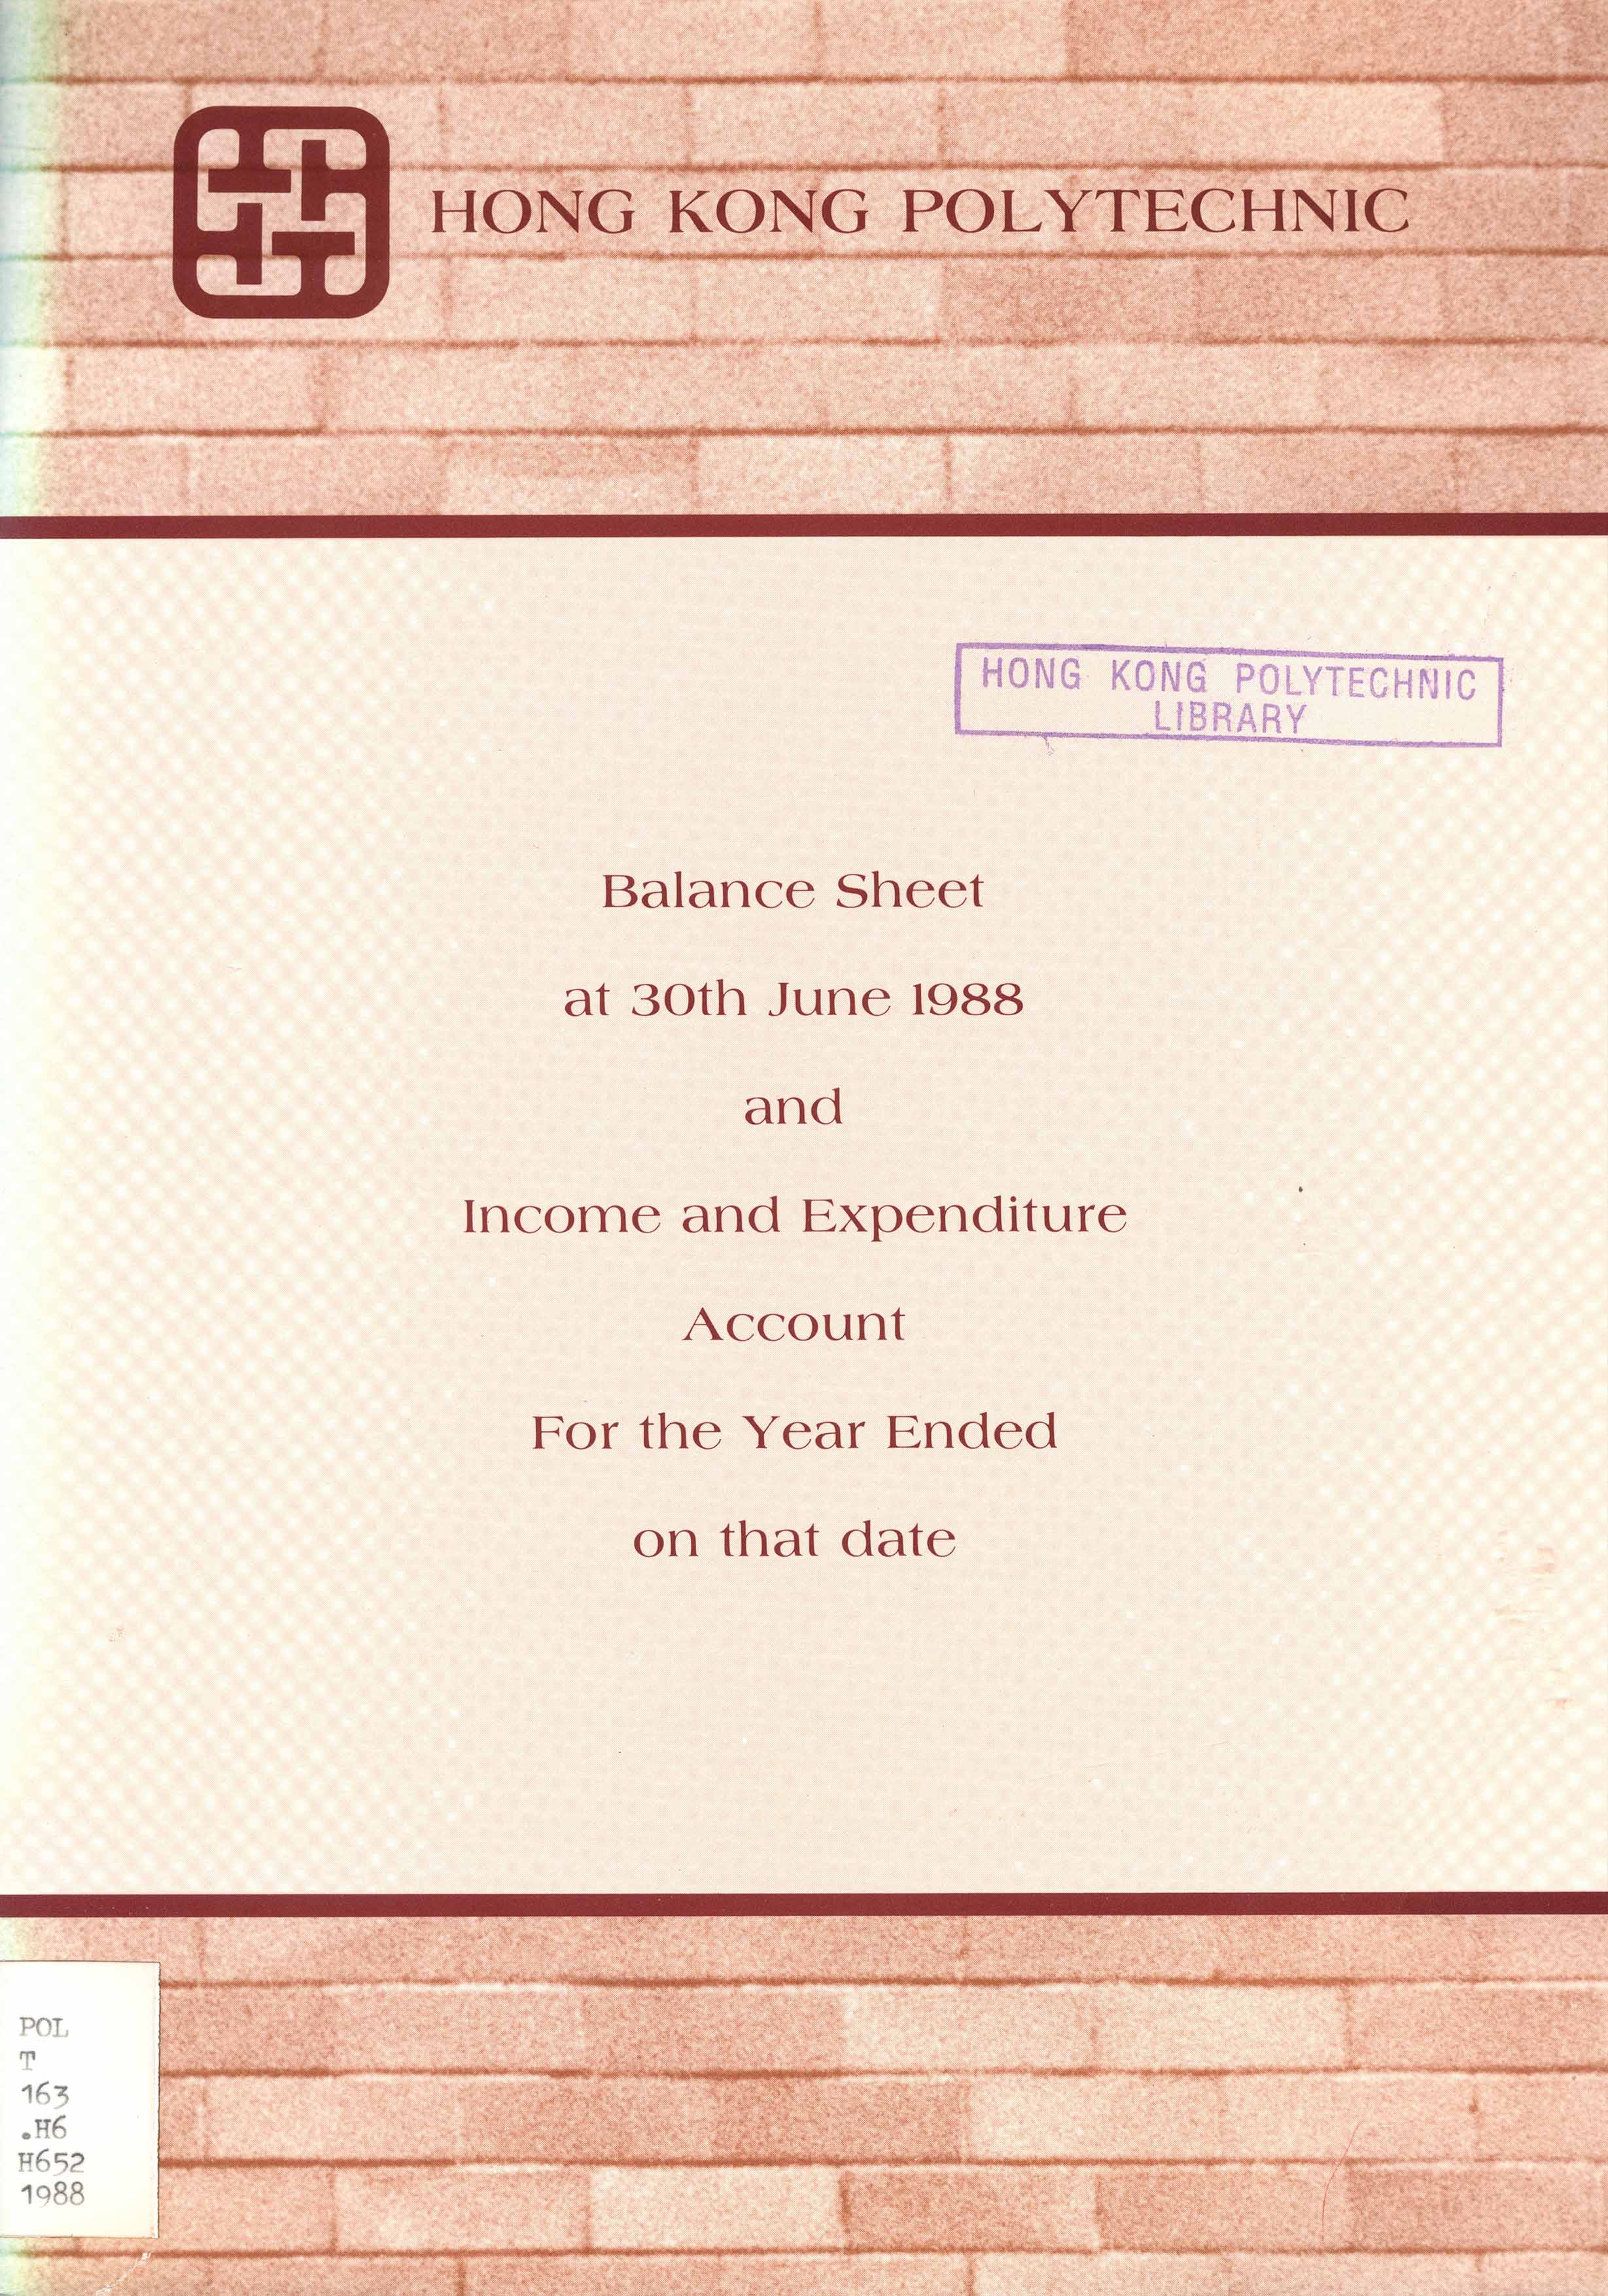 Balance sheet at 30th June 1988 and income and expenditure account for the year ended on that date